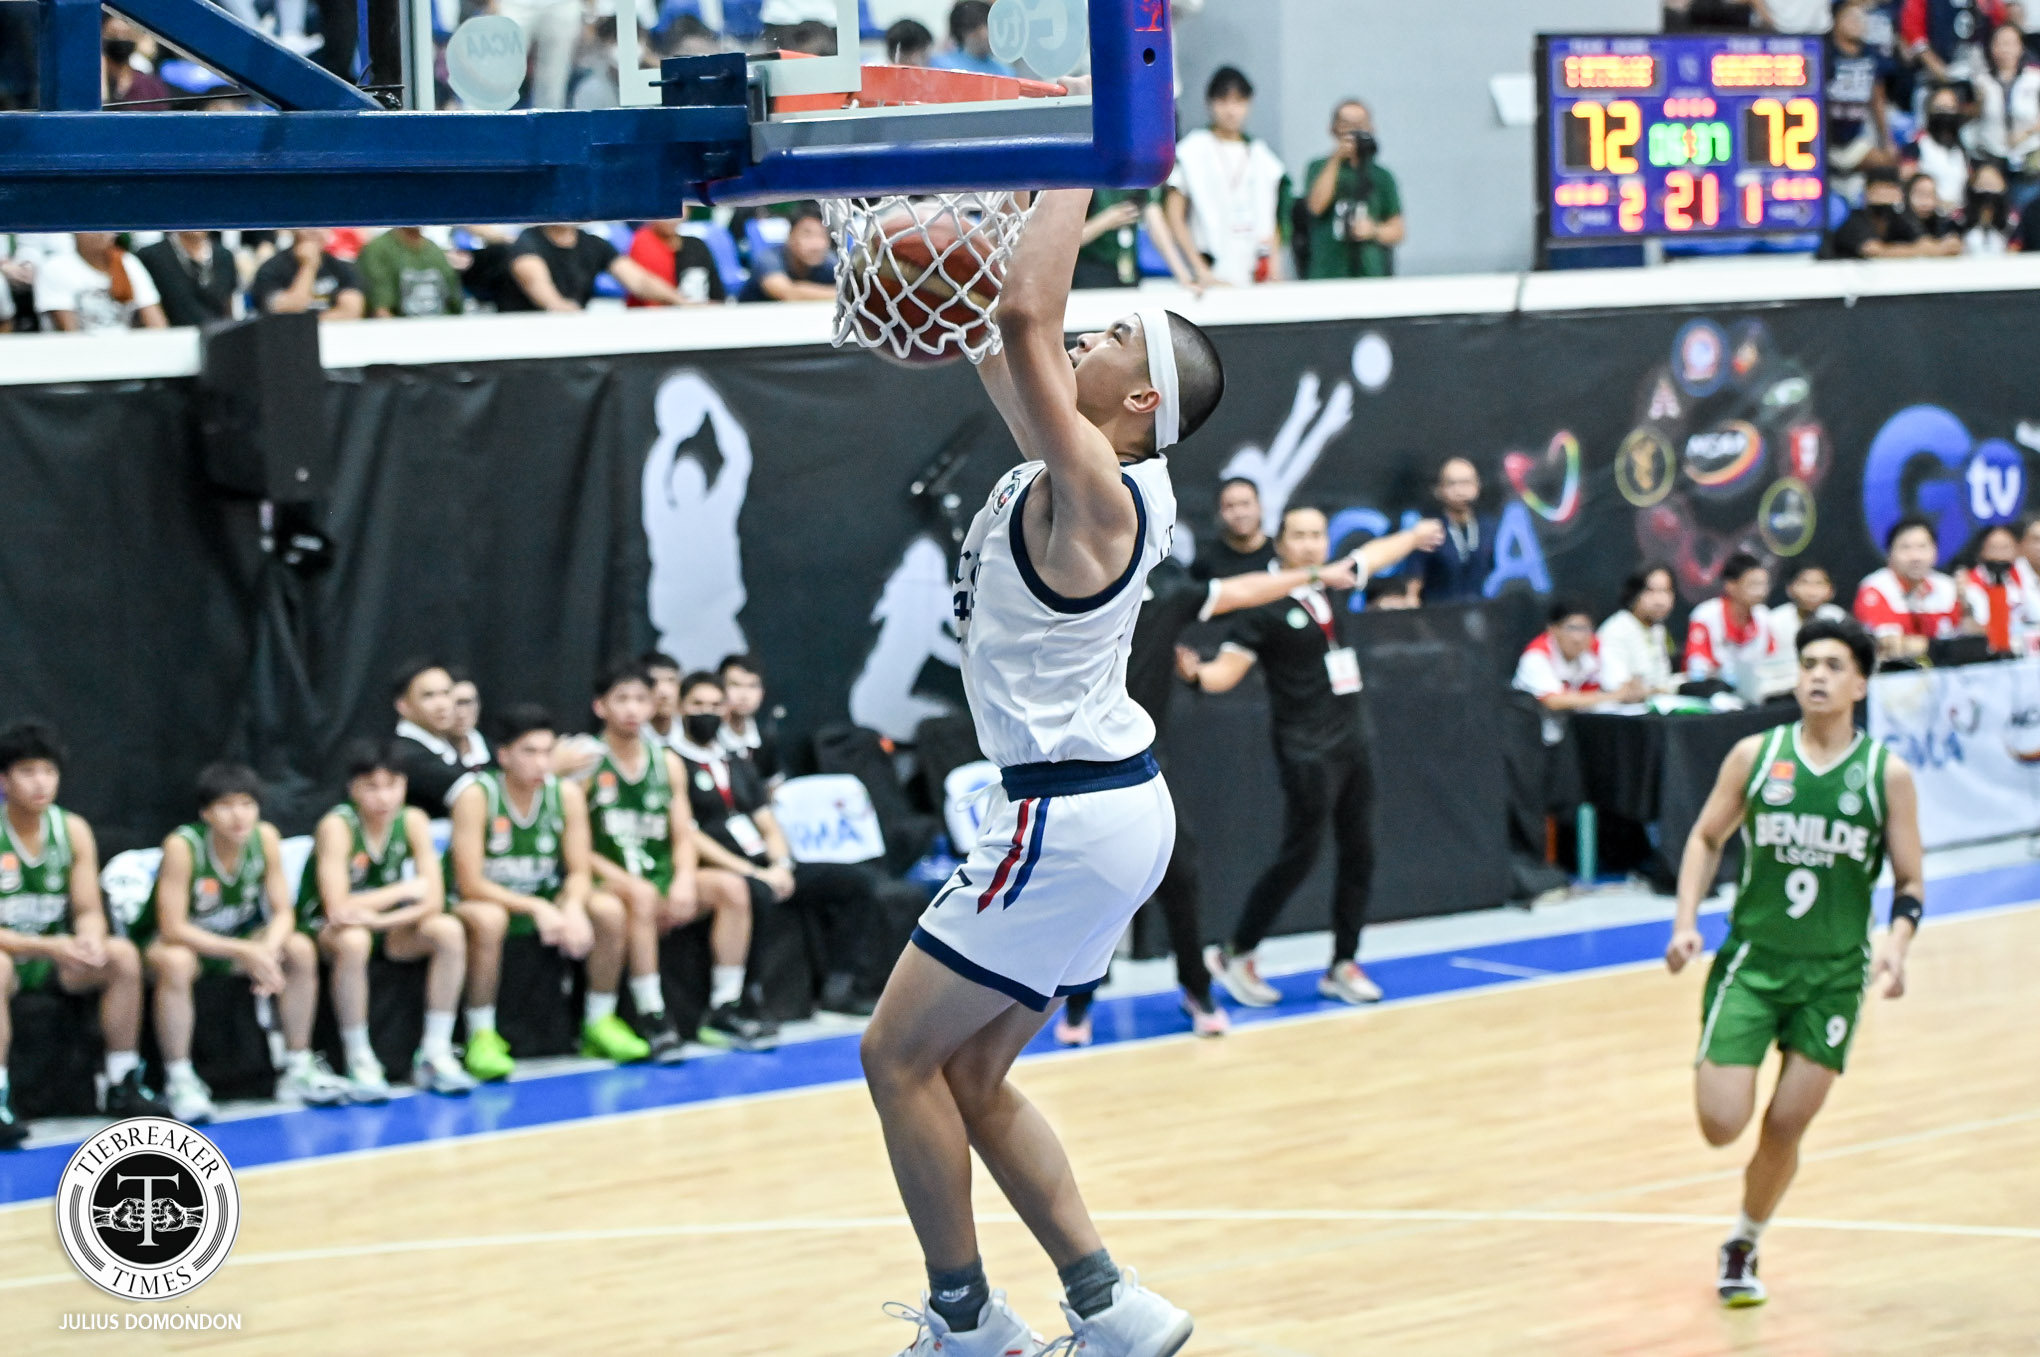 NCAA-98-LSGH-vs-Letran-Andy-Gemao-1 Despite possibility of reunion with Gold in UPIS, Gemao plans to finish SHS in Letran Basketball CSJL NCAA News  - philippine sports news